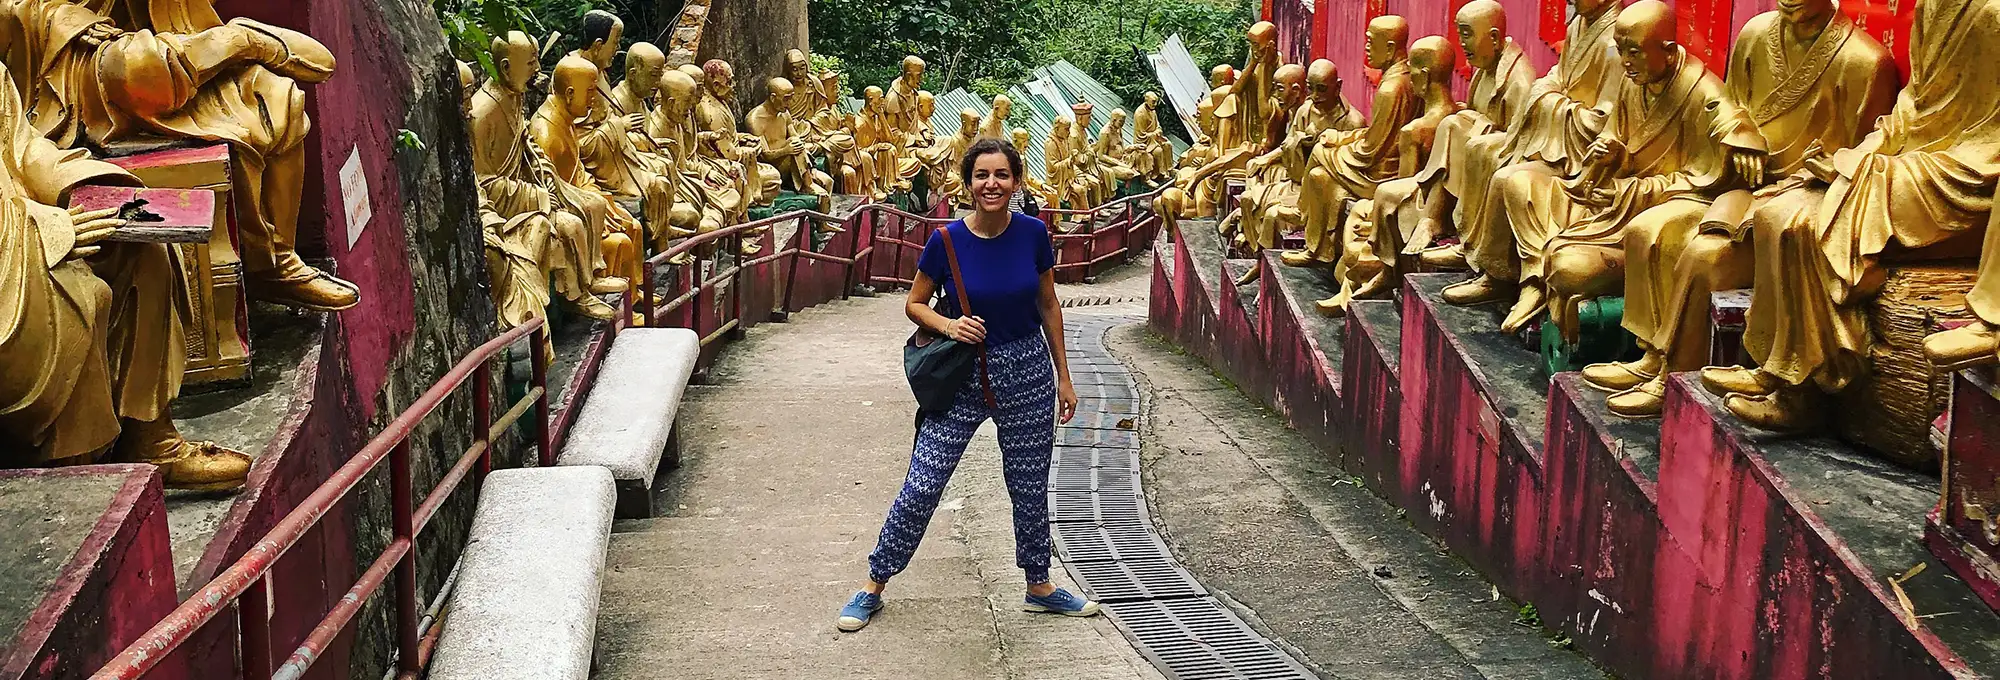 Student on the path leading to the Ten Thousand Buddhas Monastery in Hong Kong